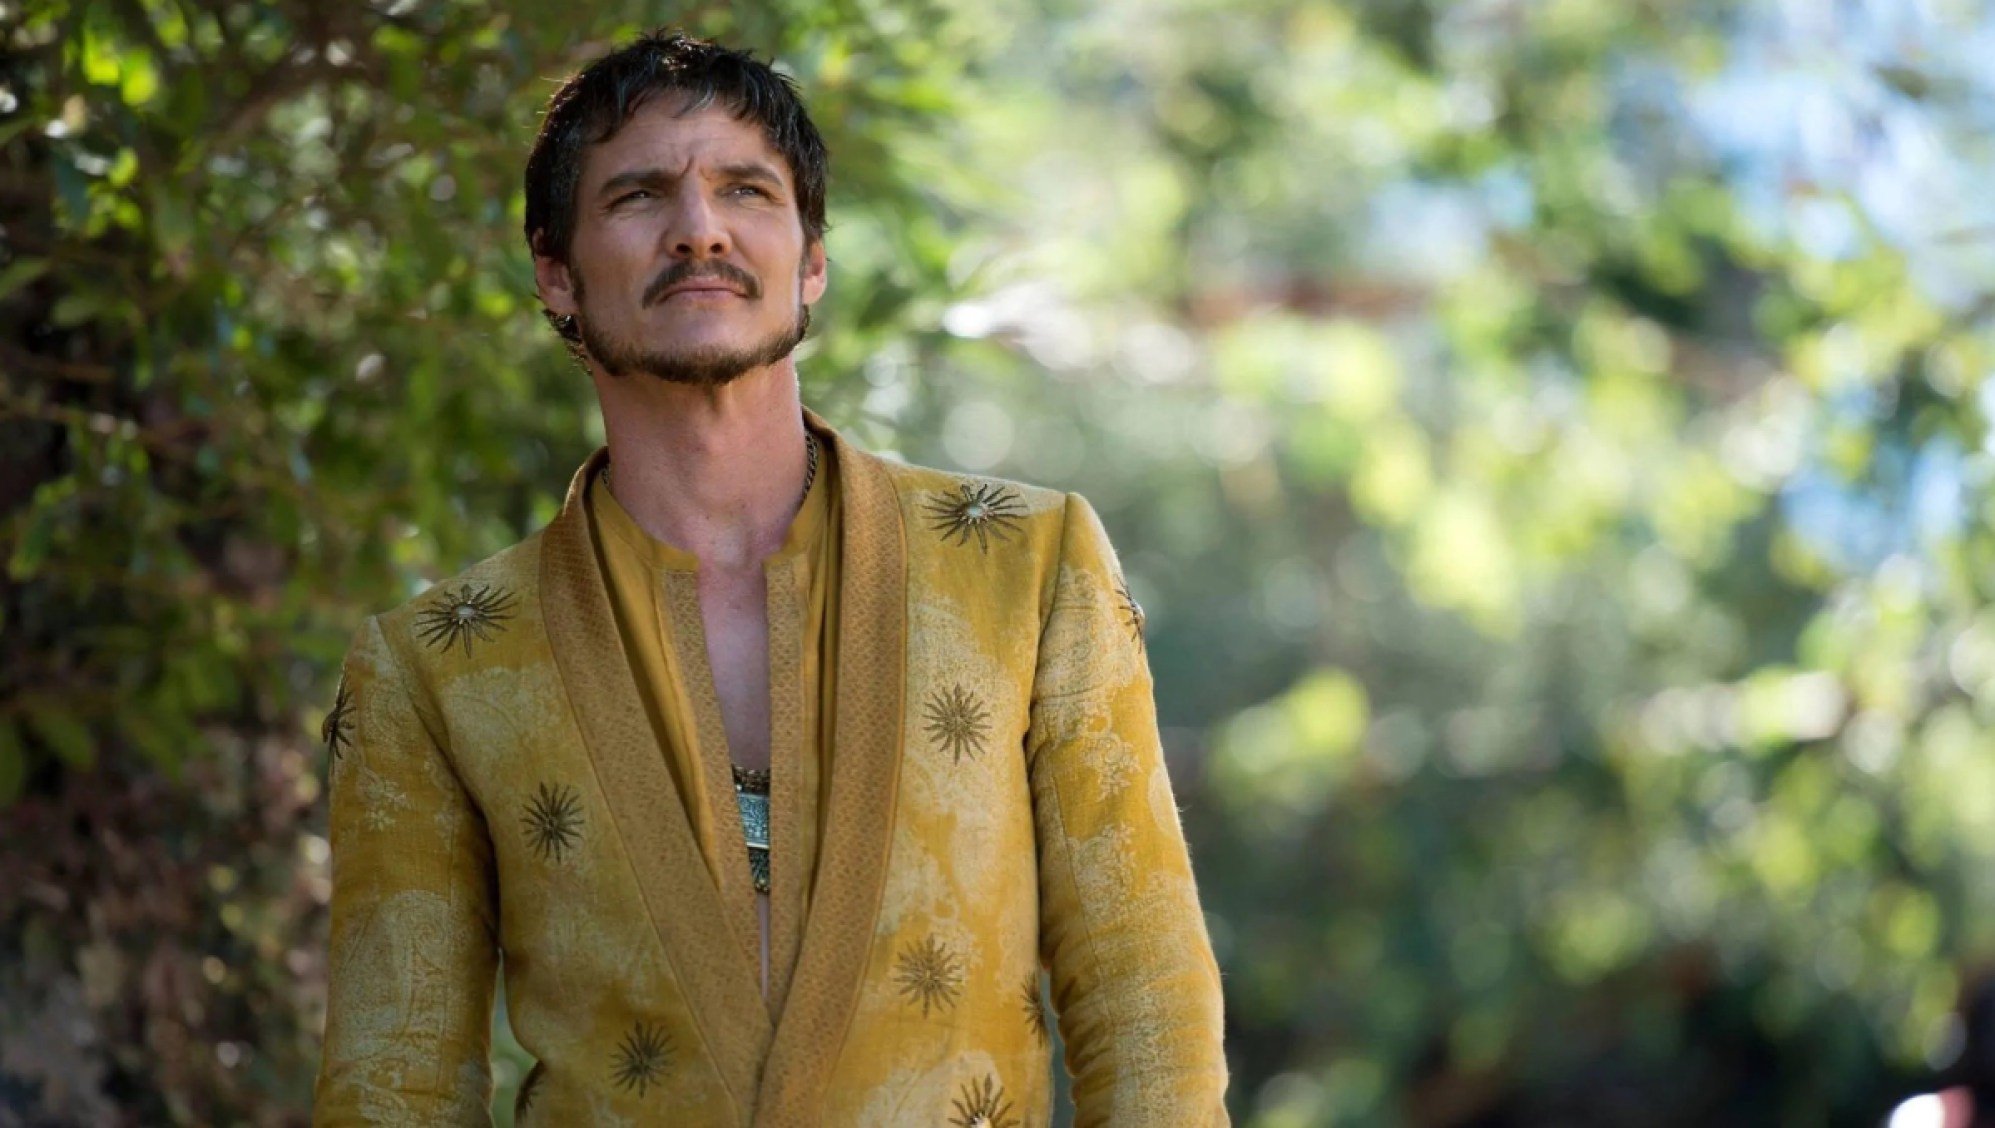 Pedro Pascal as Oberyn Martell in 'Game of Thrones'